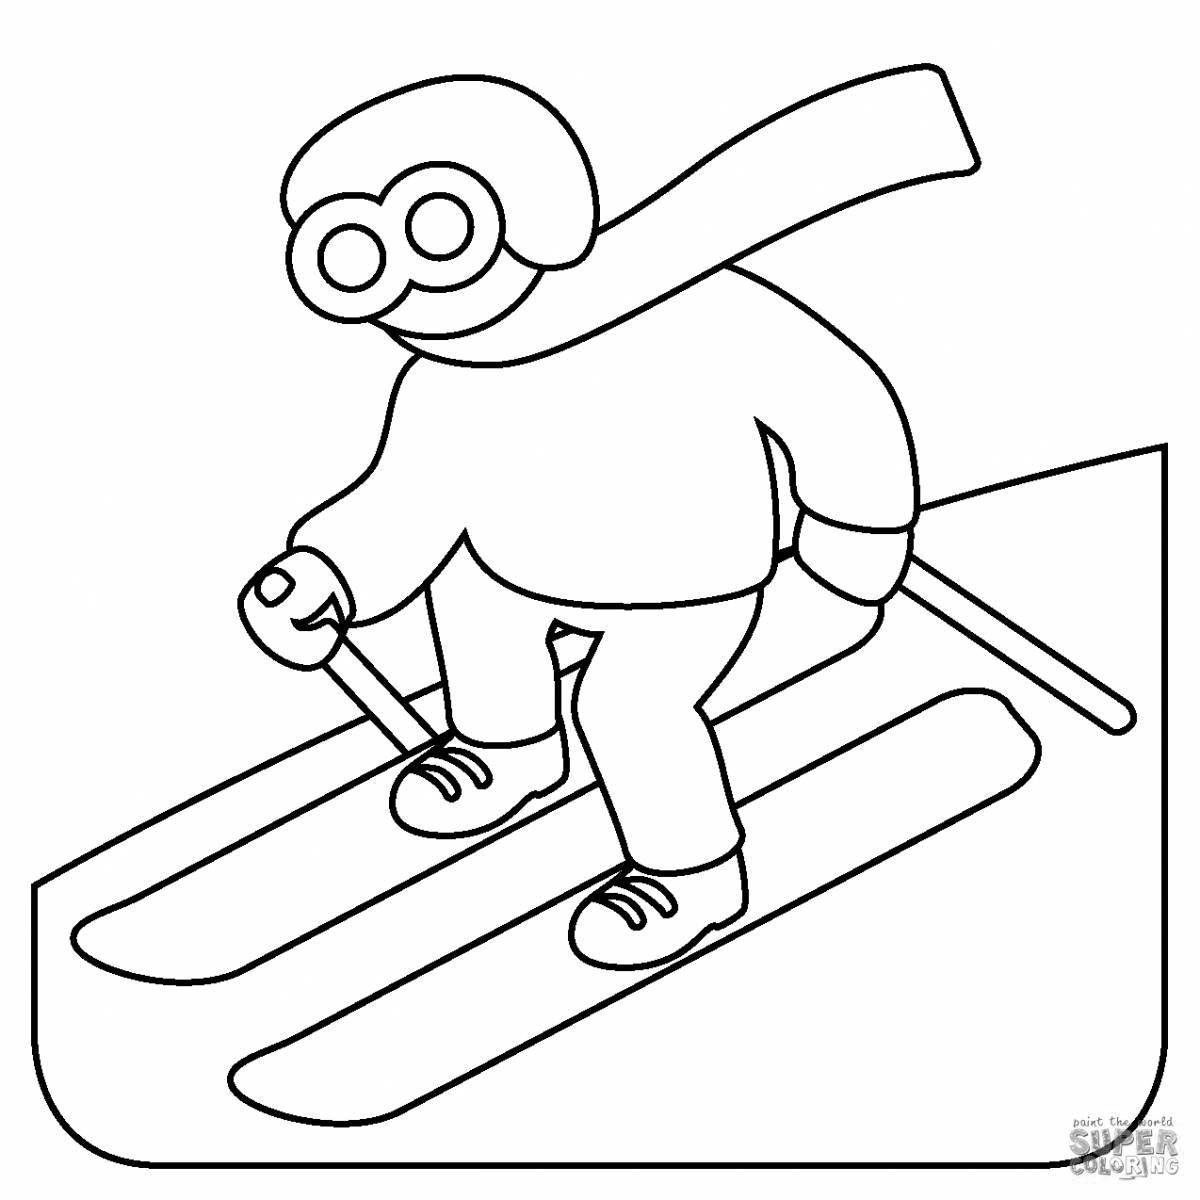 Coloring book bright baby skier